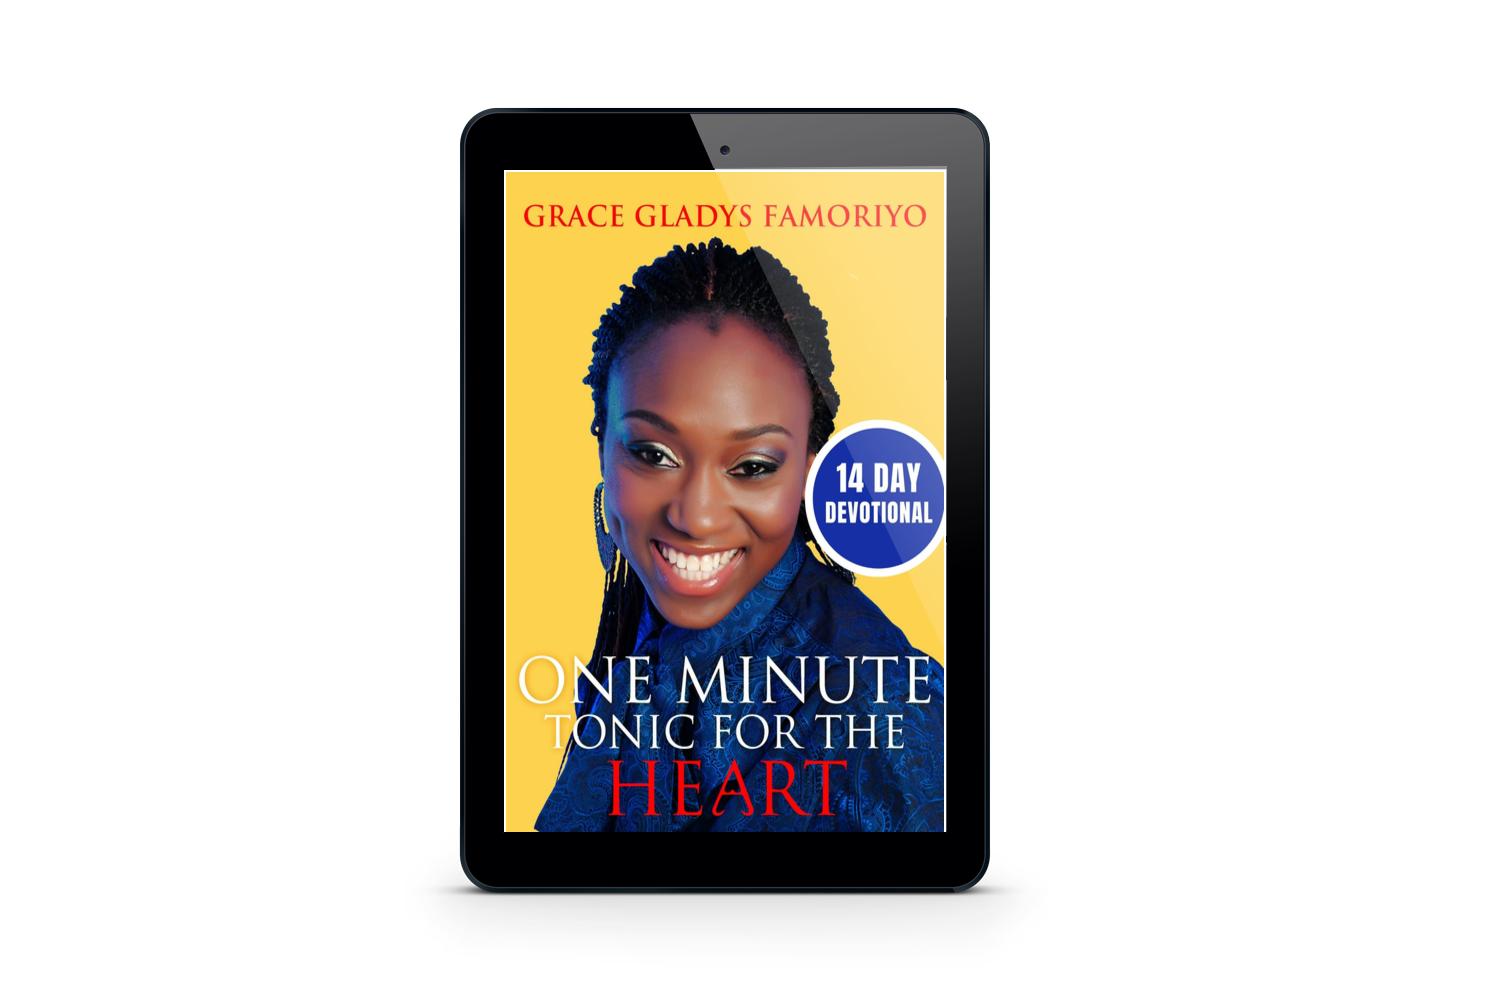 One Minute Tonic For The Heart - Grace Gladys Famoriyo